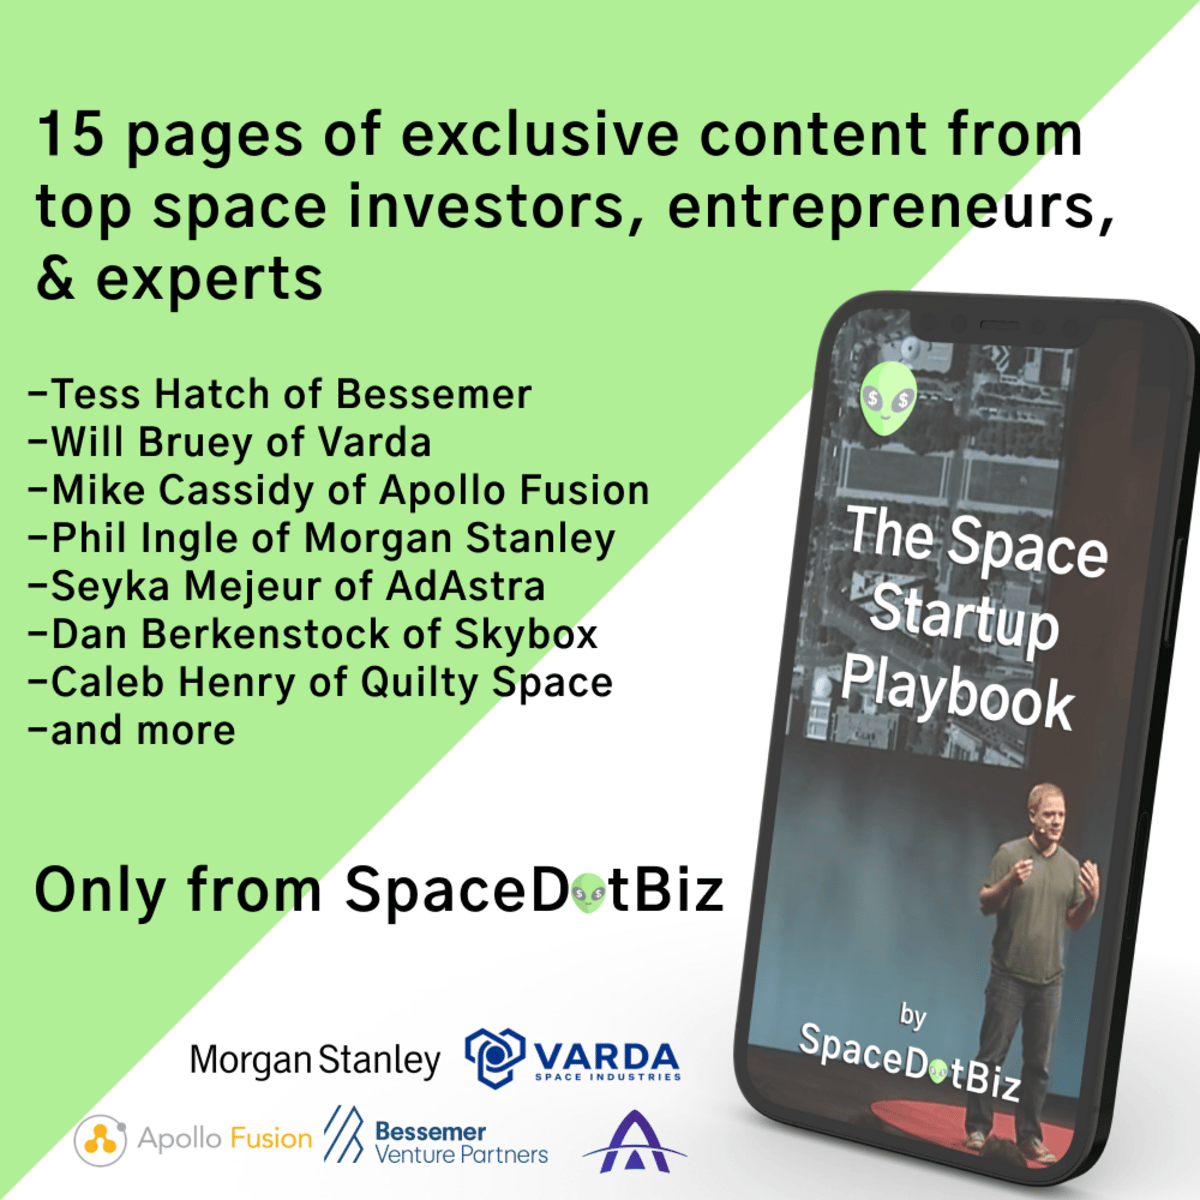 Space Startup Playbook